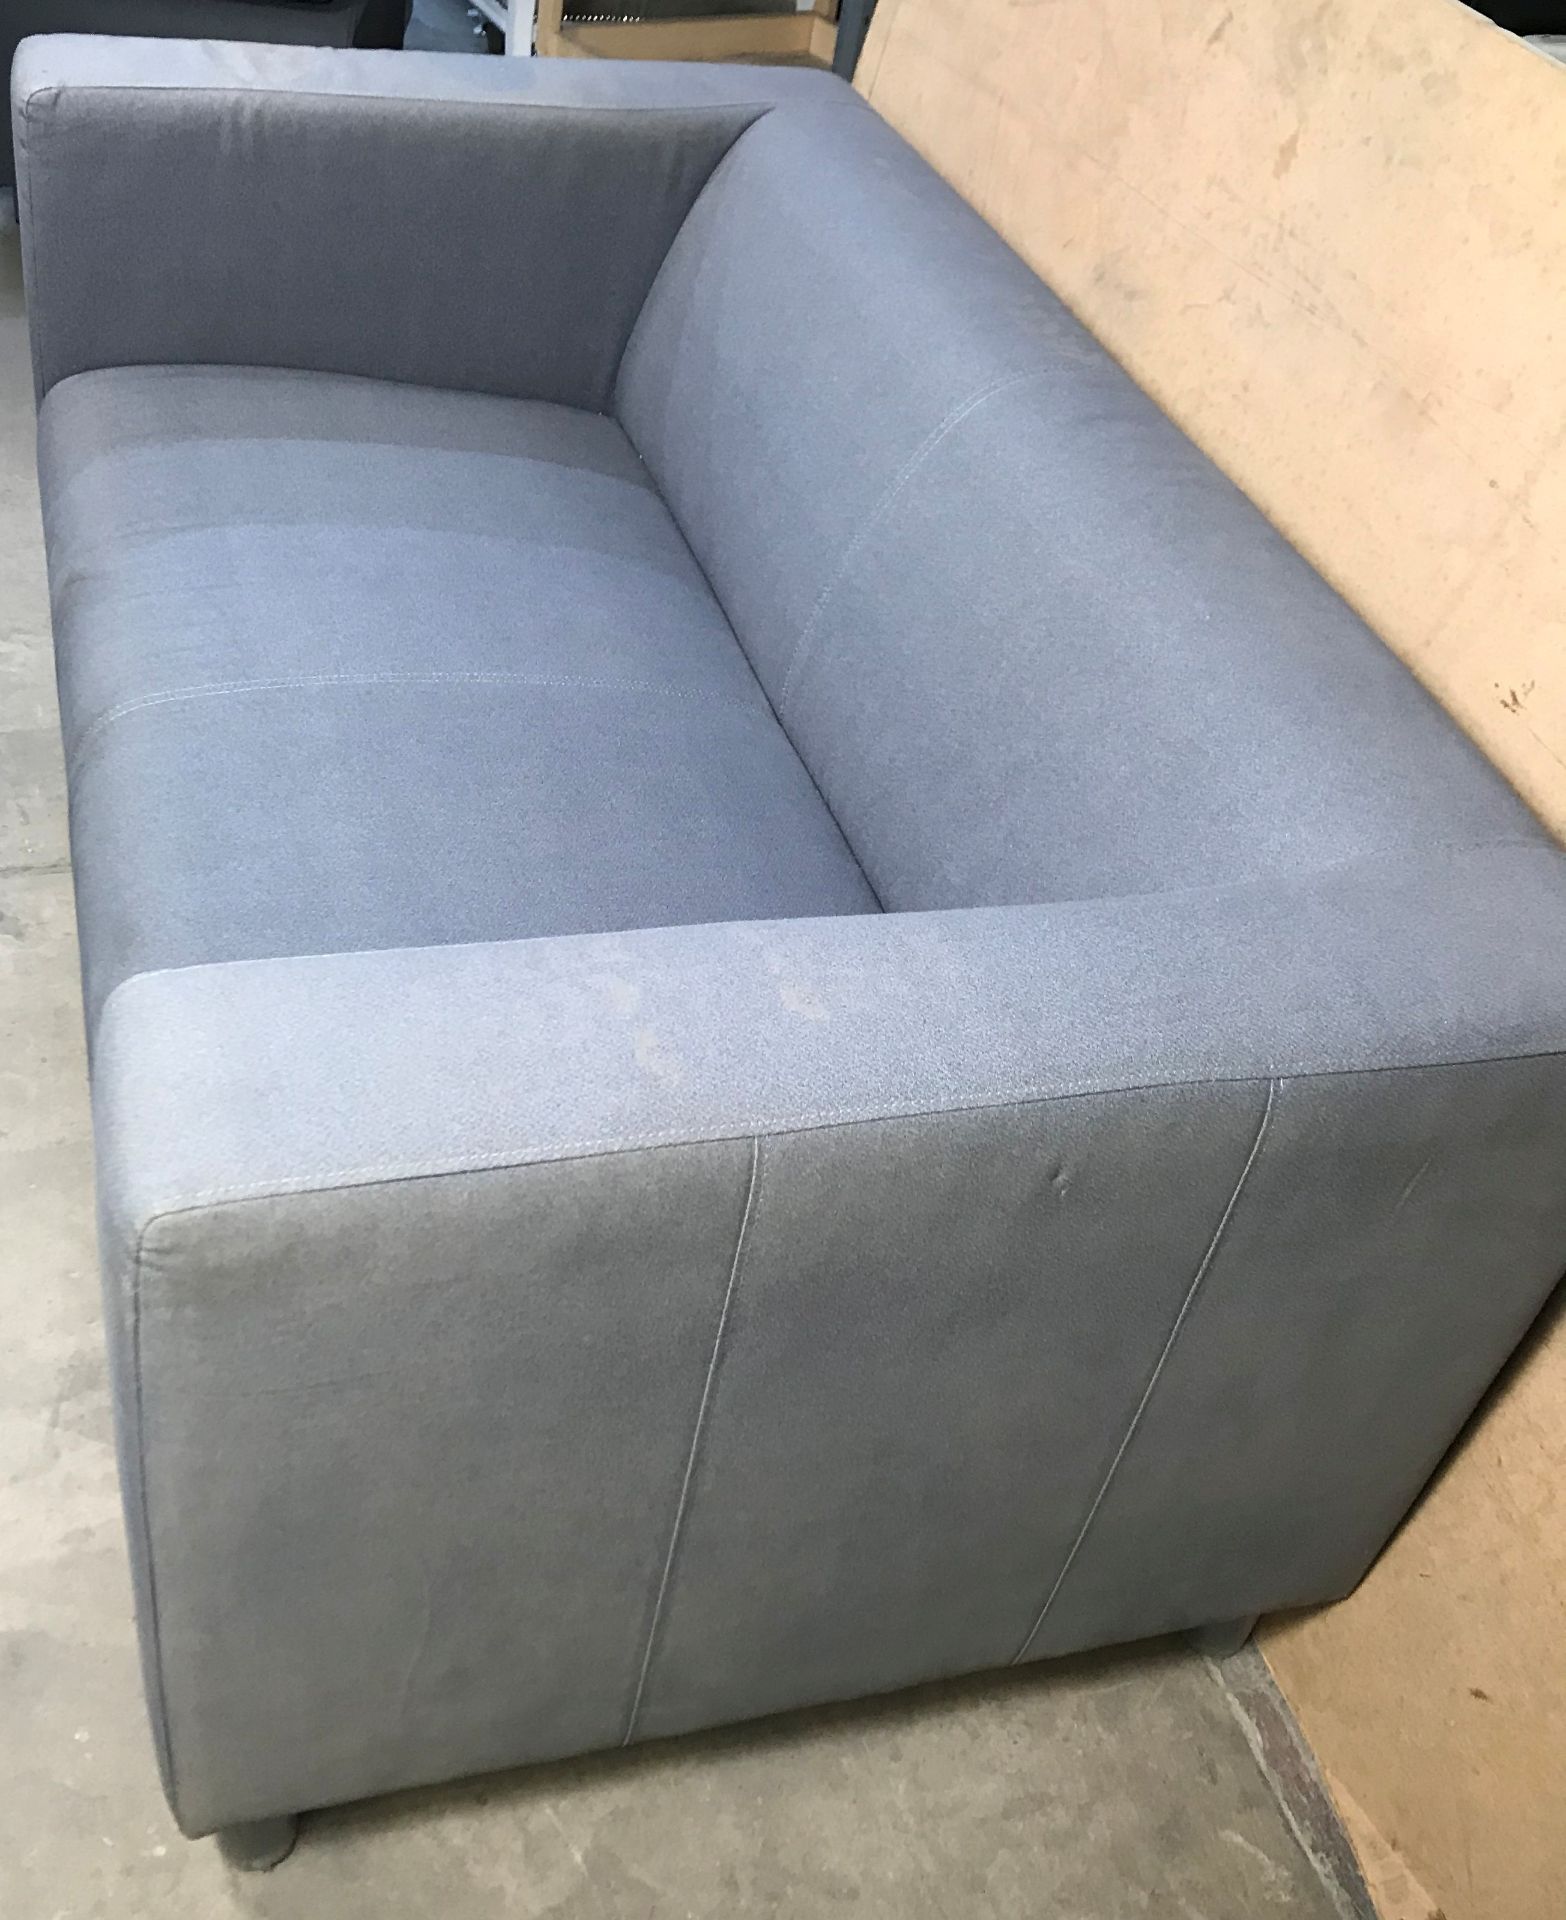 2 seater light grey Couch with 2 Footstalls - Image 5 of 6